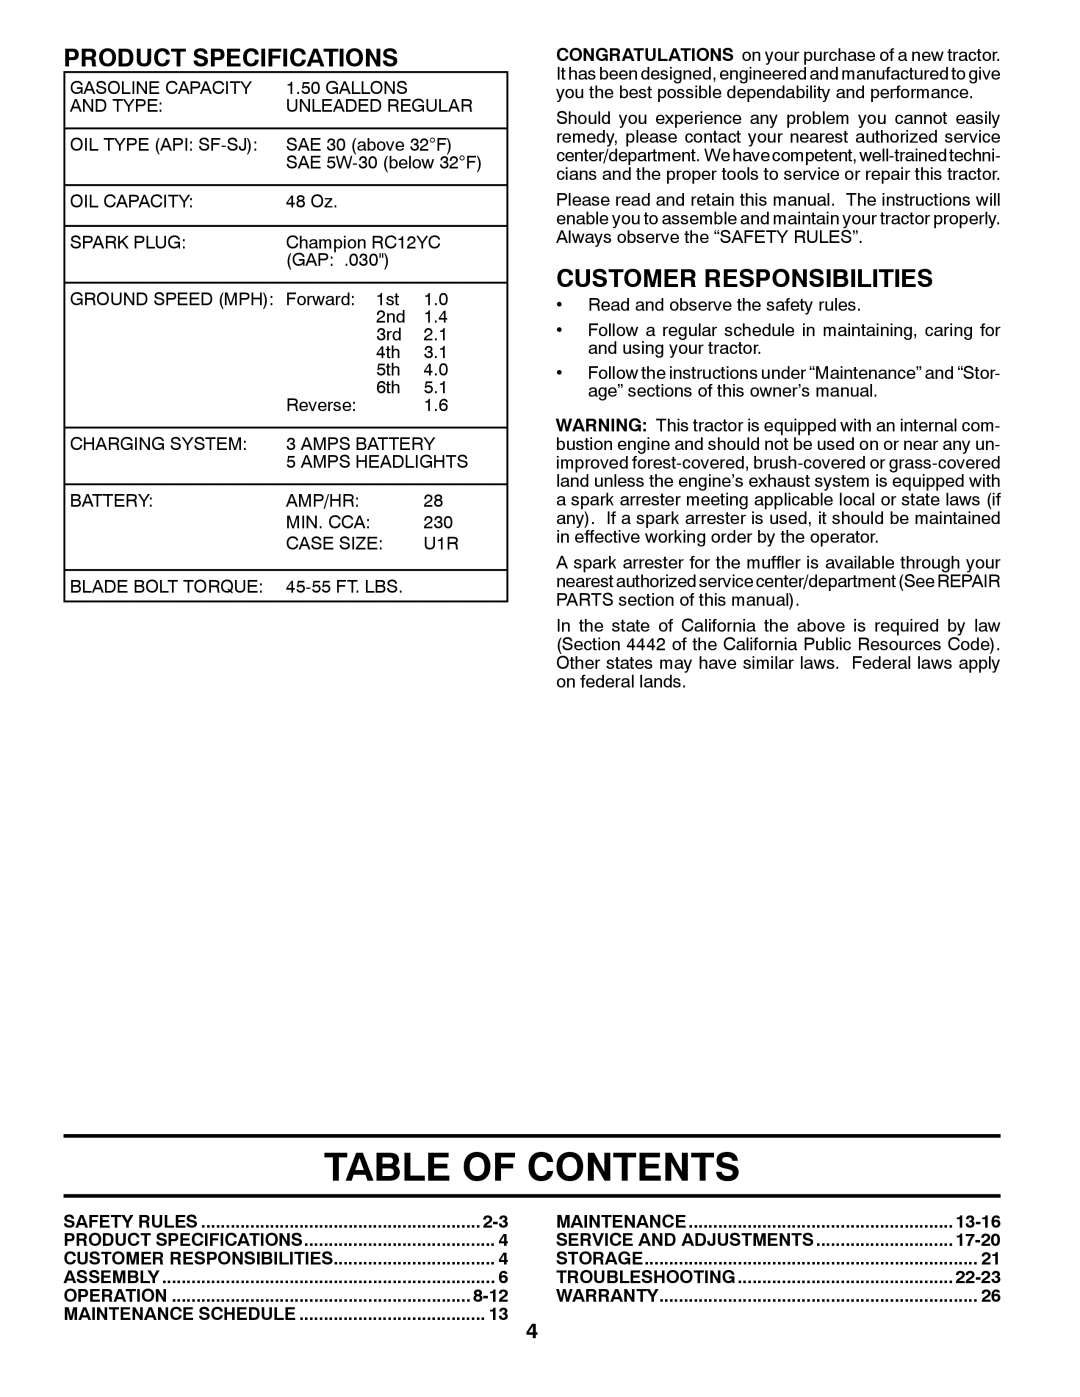 Poulan 96016002200, 431147 Table Of Contents, Product Specifications, Customer Responsibilities, 8-12, 13-16, 17-20, 22-23 